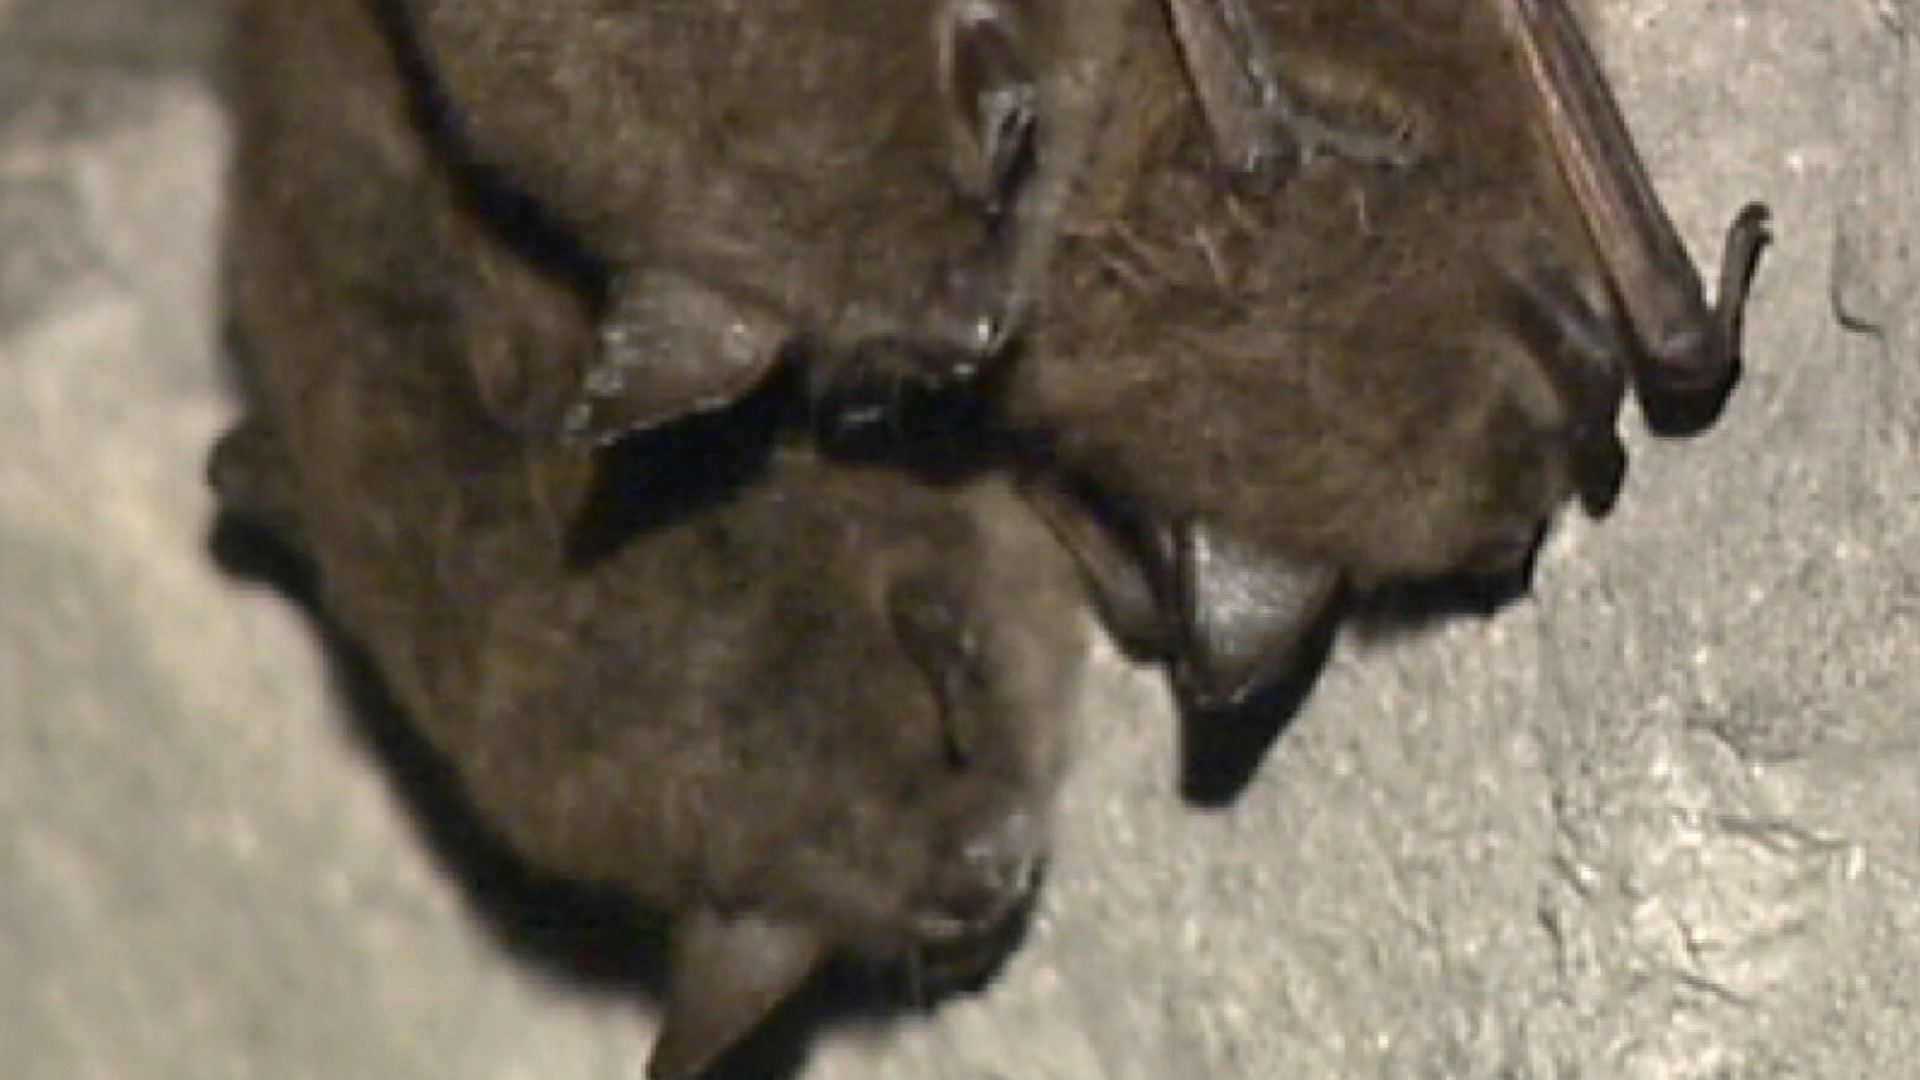 Connecticut's Department of Energy and Environmental Protection is raising awareness of the bat population in the area and white-nose syndrome.